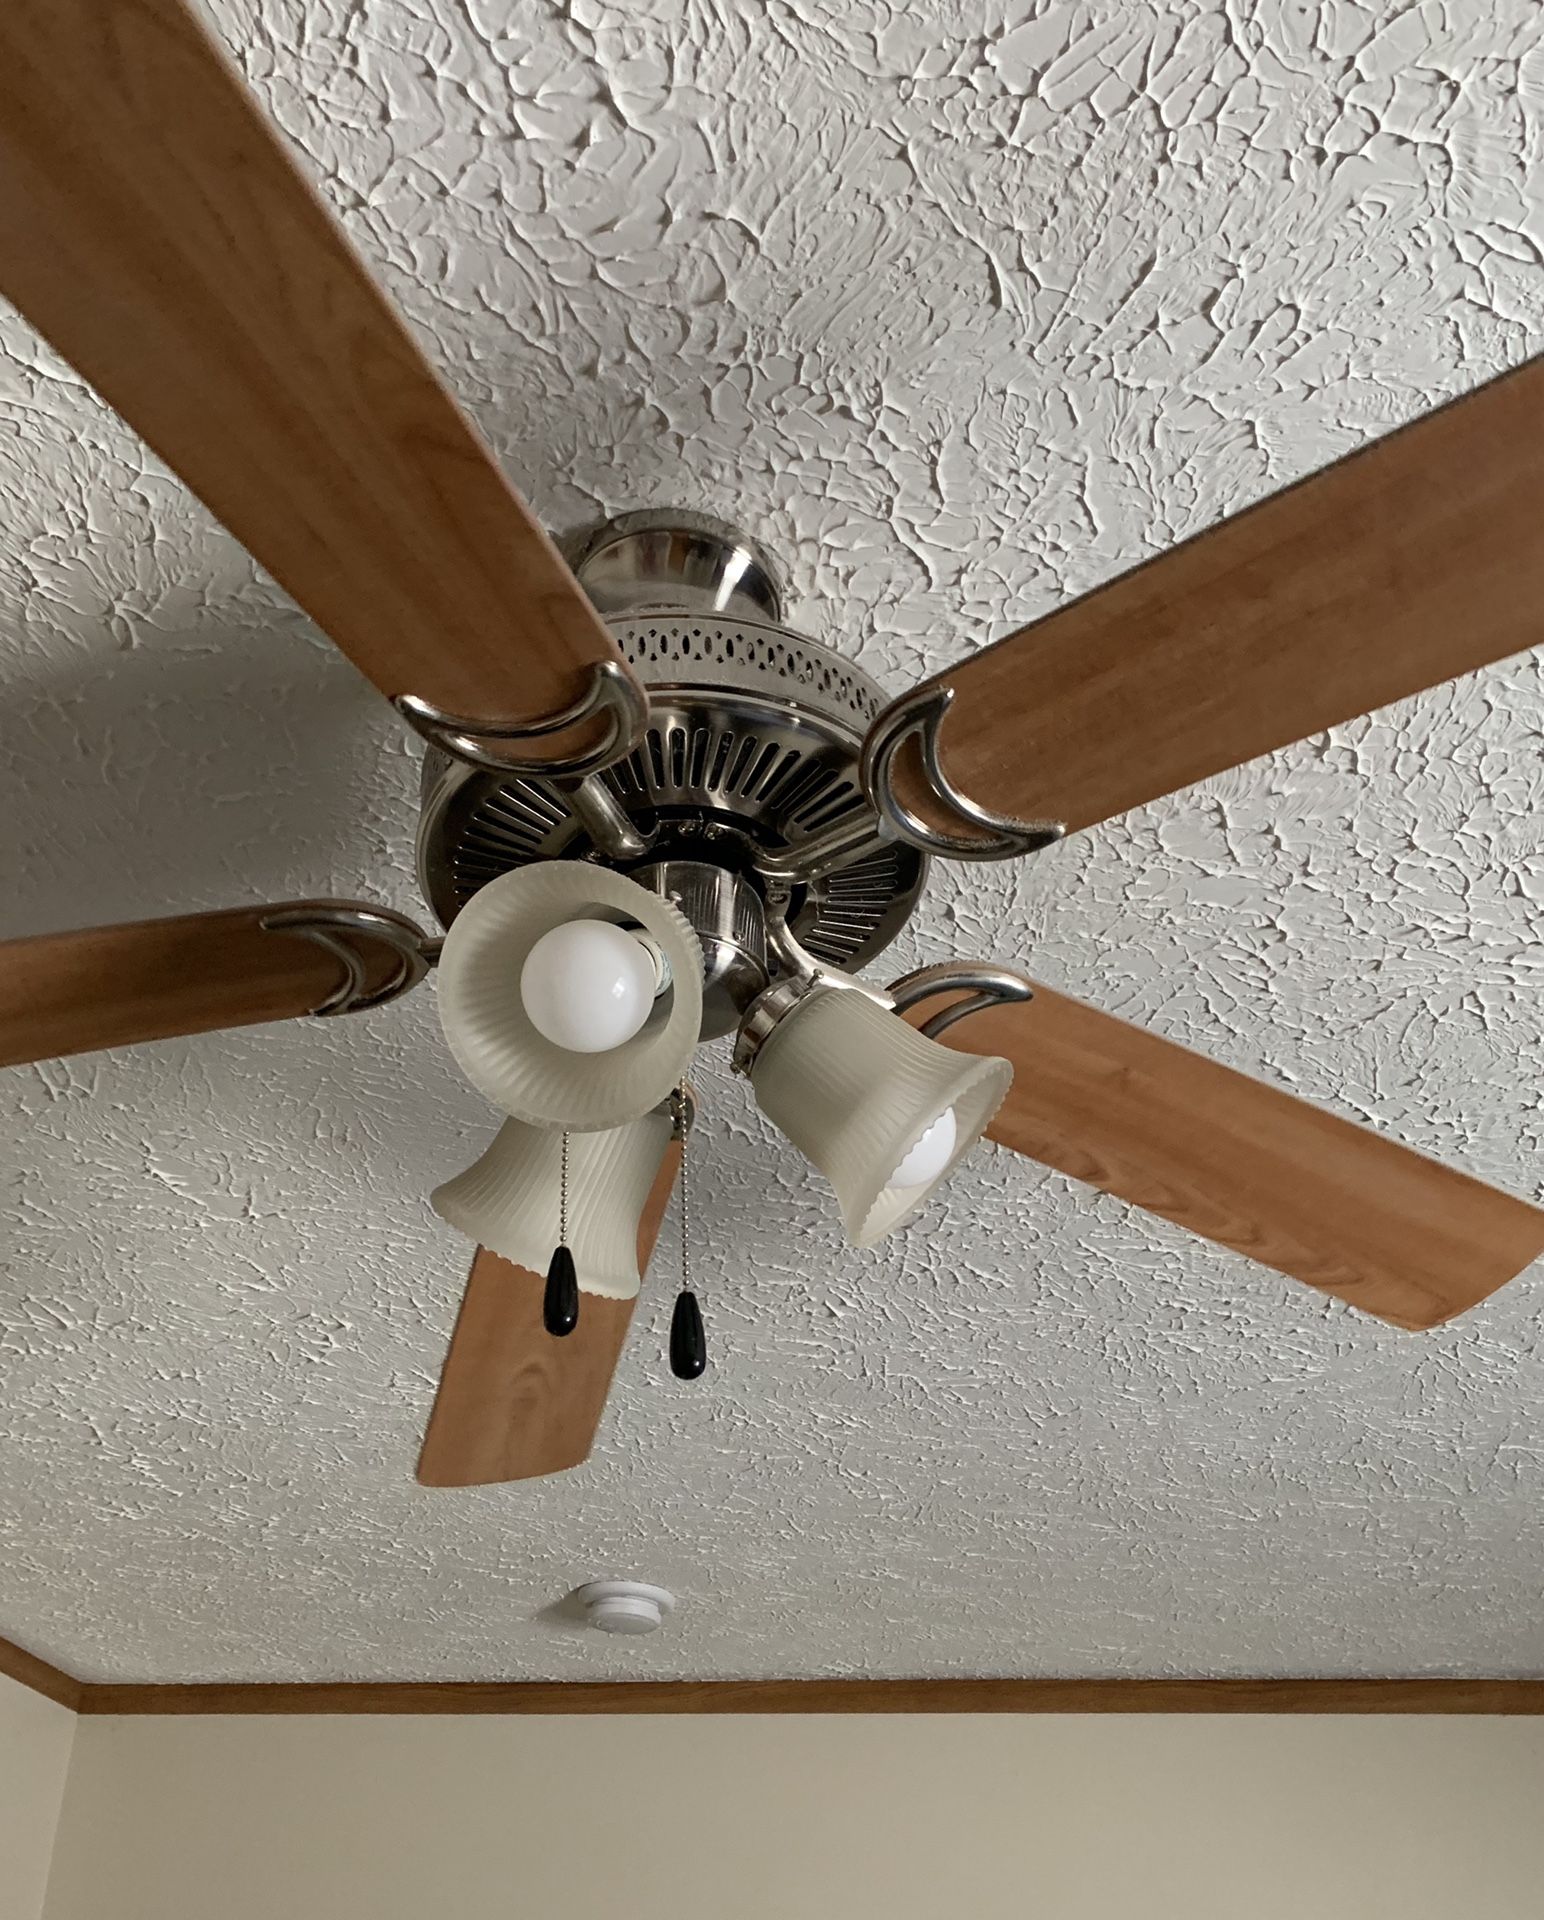 Ceiling fan and light fixture